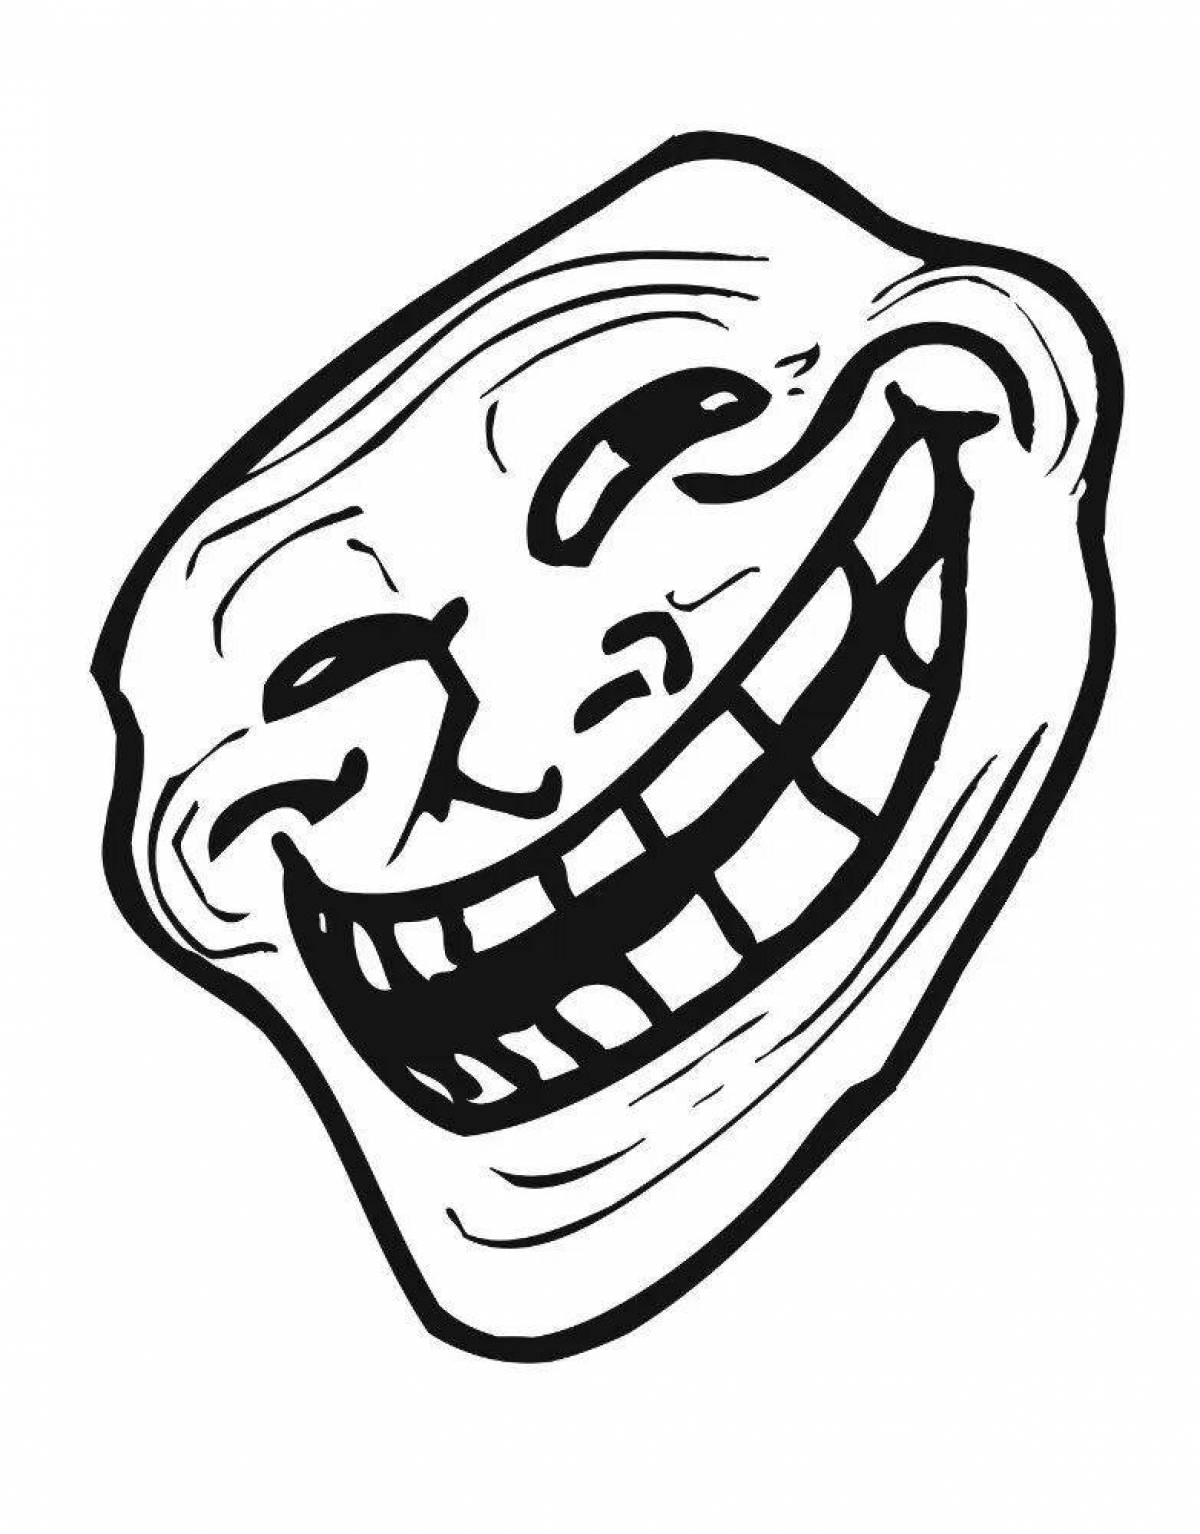 Zany trollface coloring page